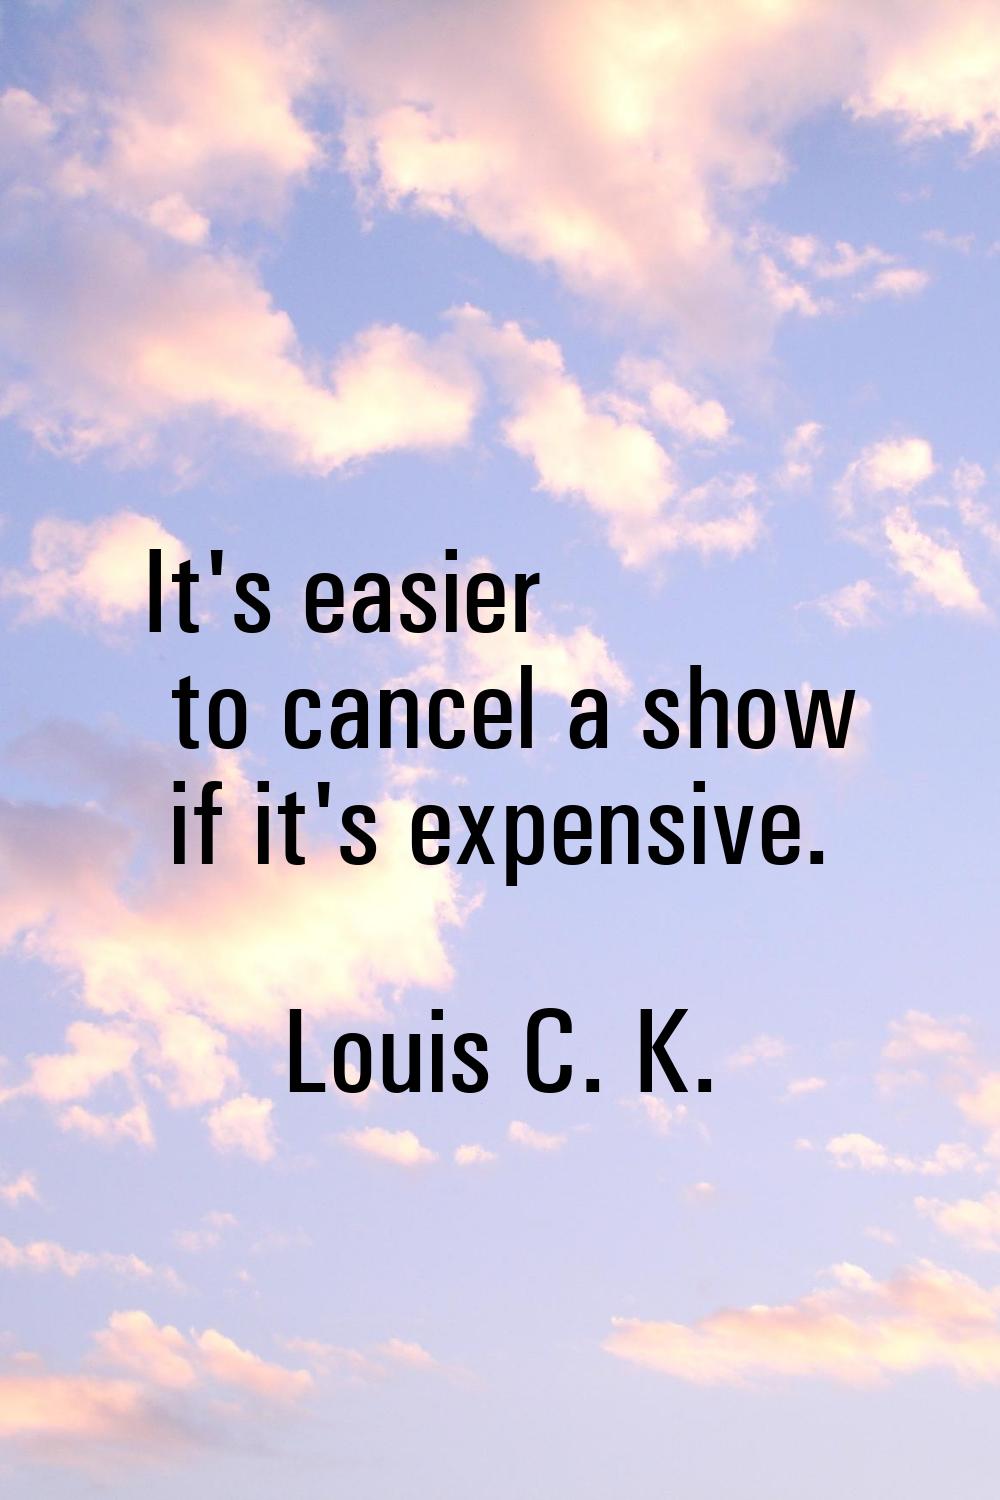 It's easier to cancel a show if it's expensive.